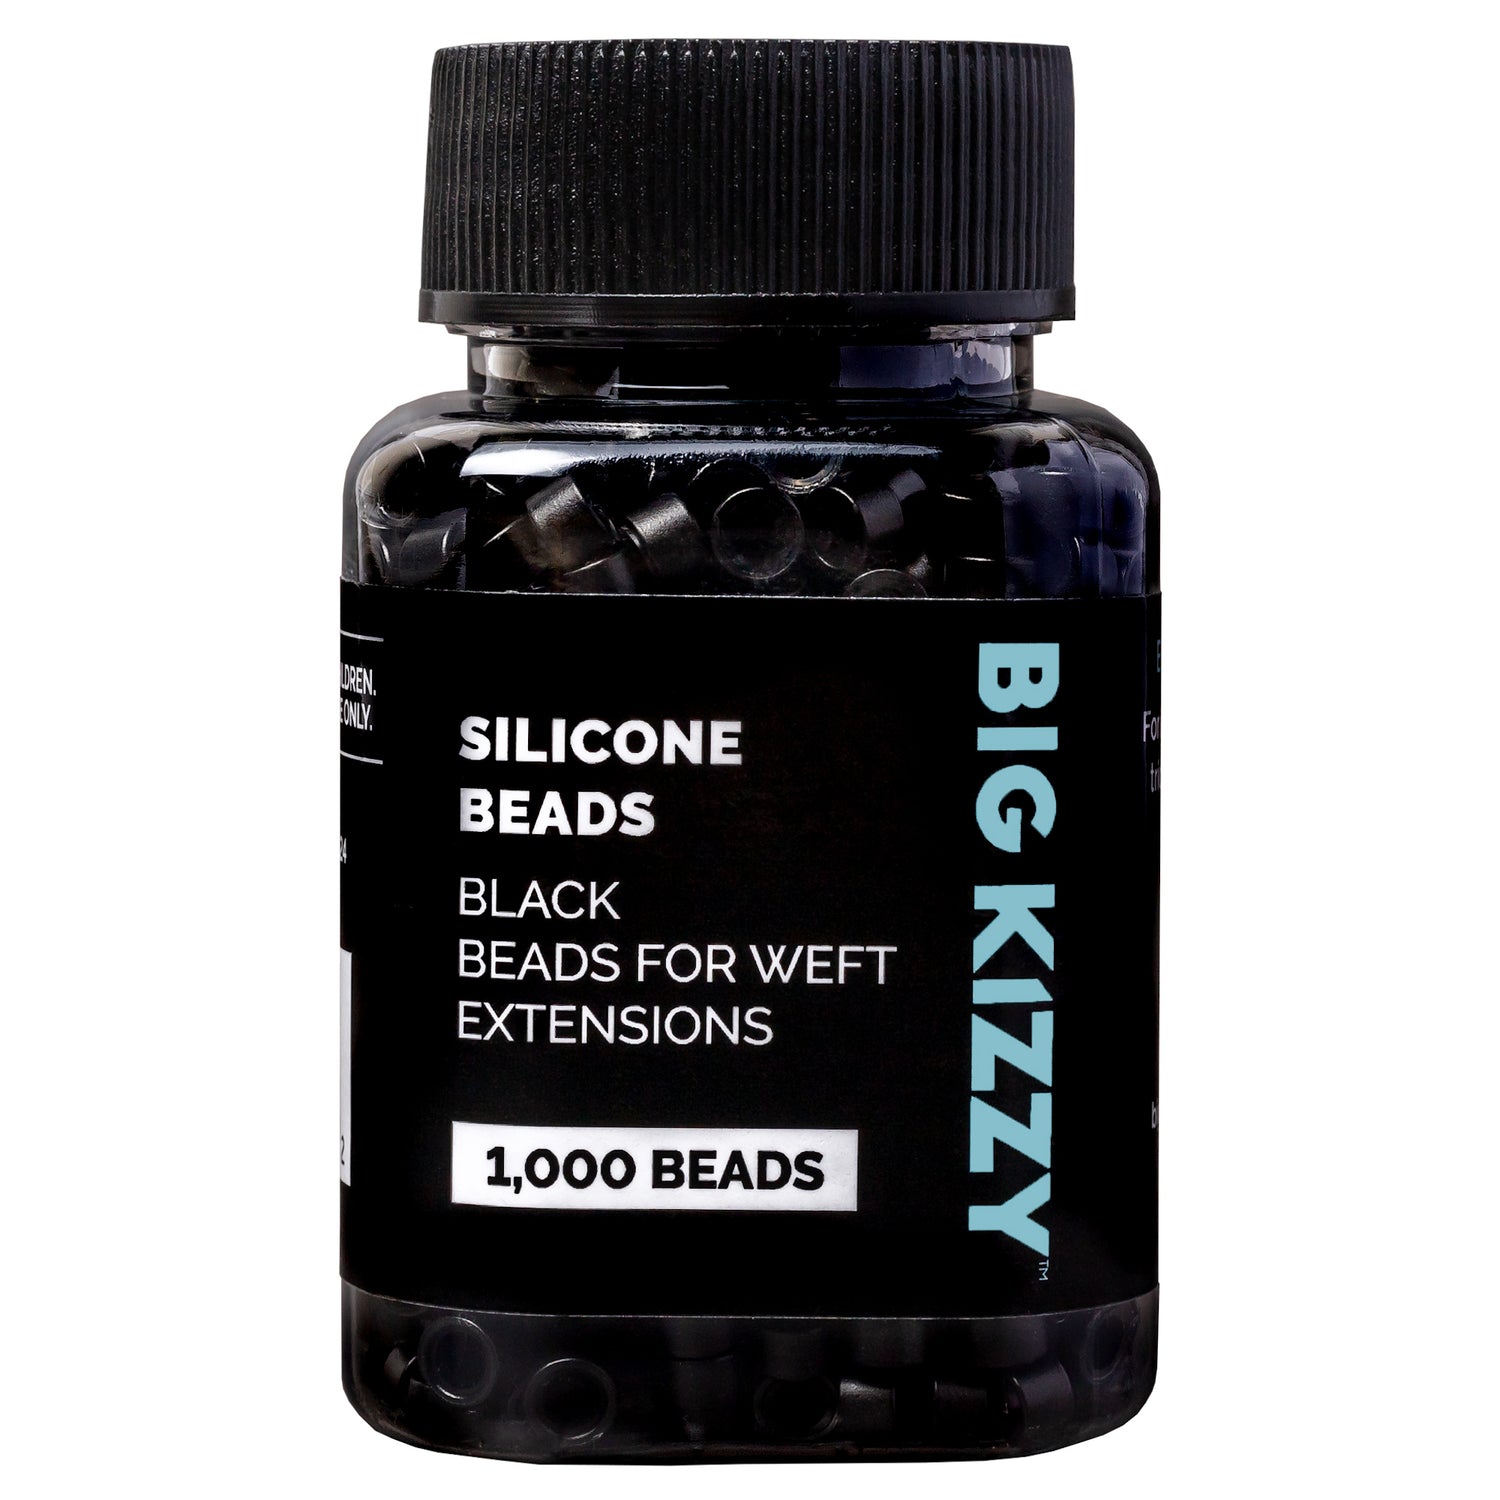 A closed bottle of 1000 Black Beads for Weft Extensions